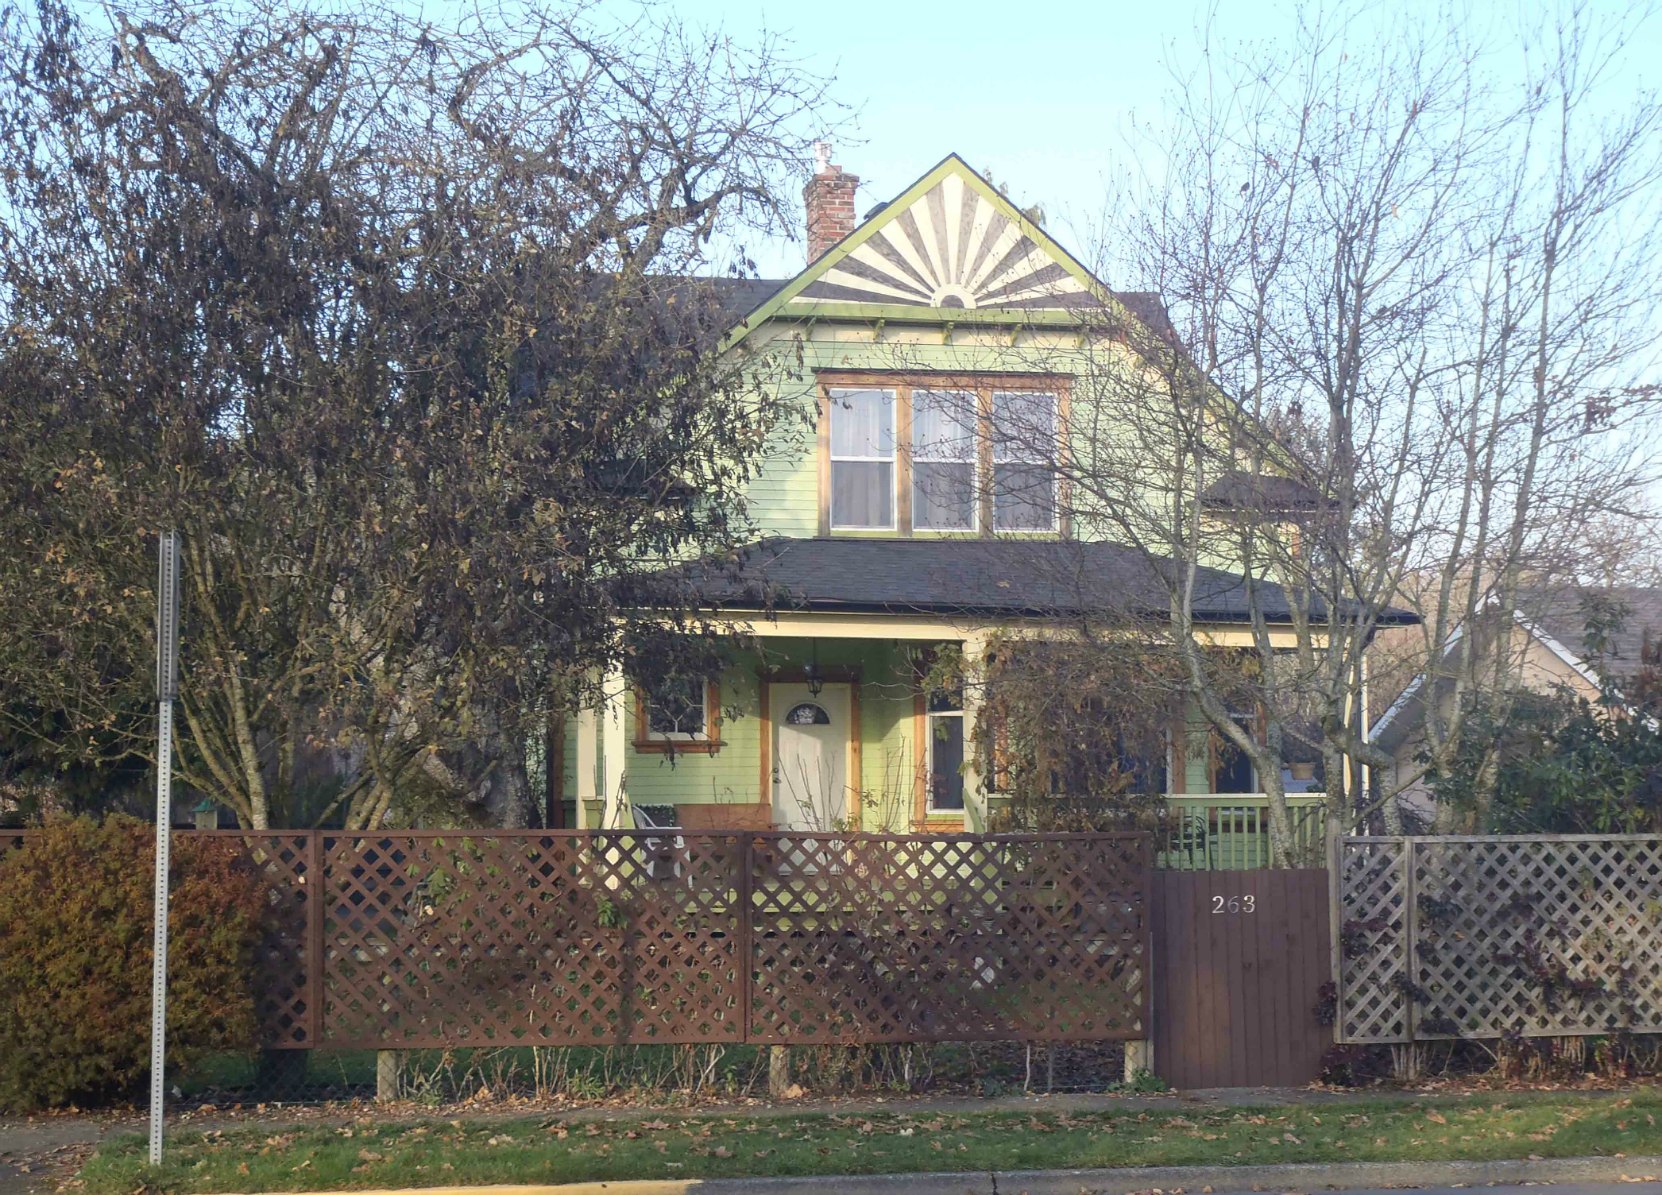 263 Cairnsmore, built circa 1906 on a one acre lot